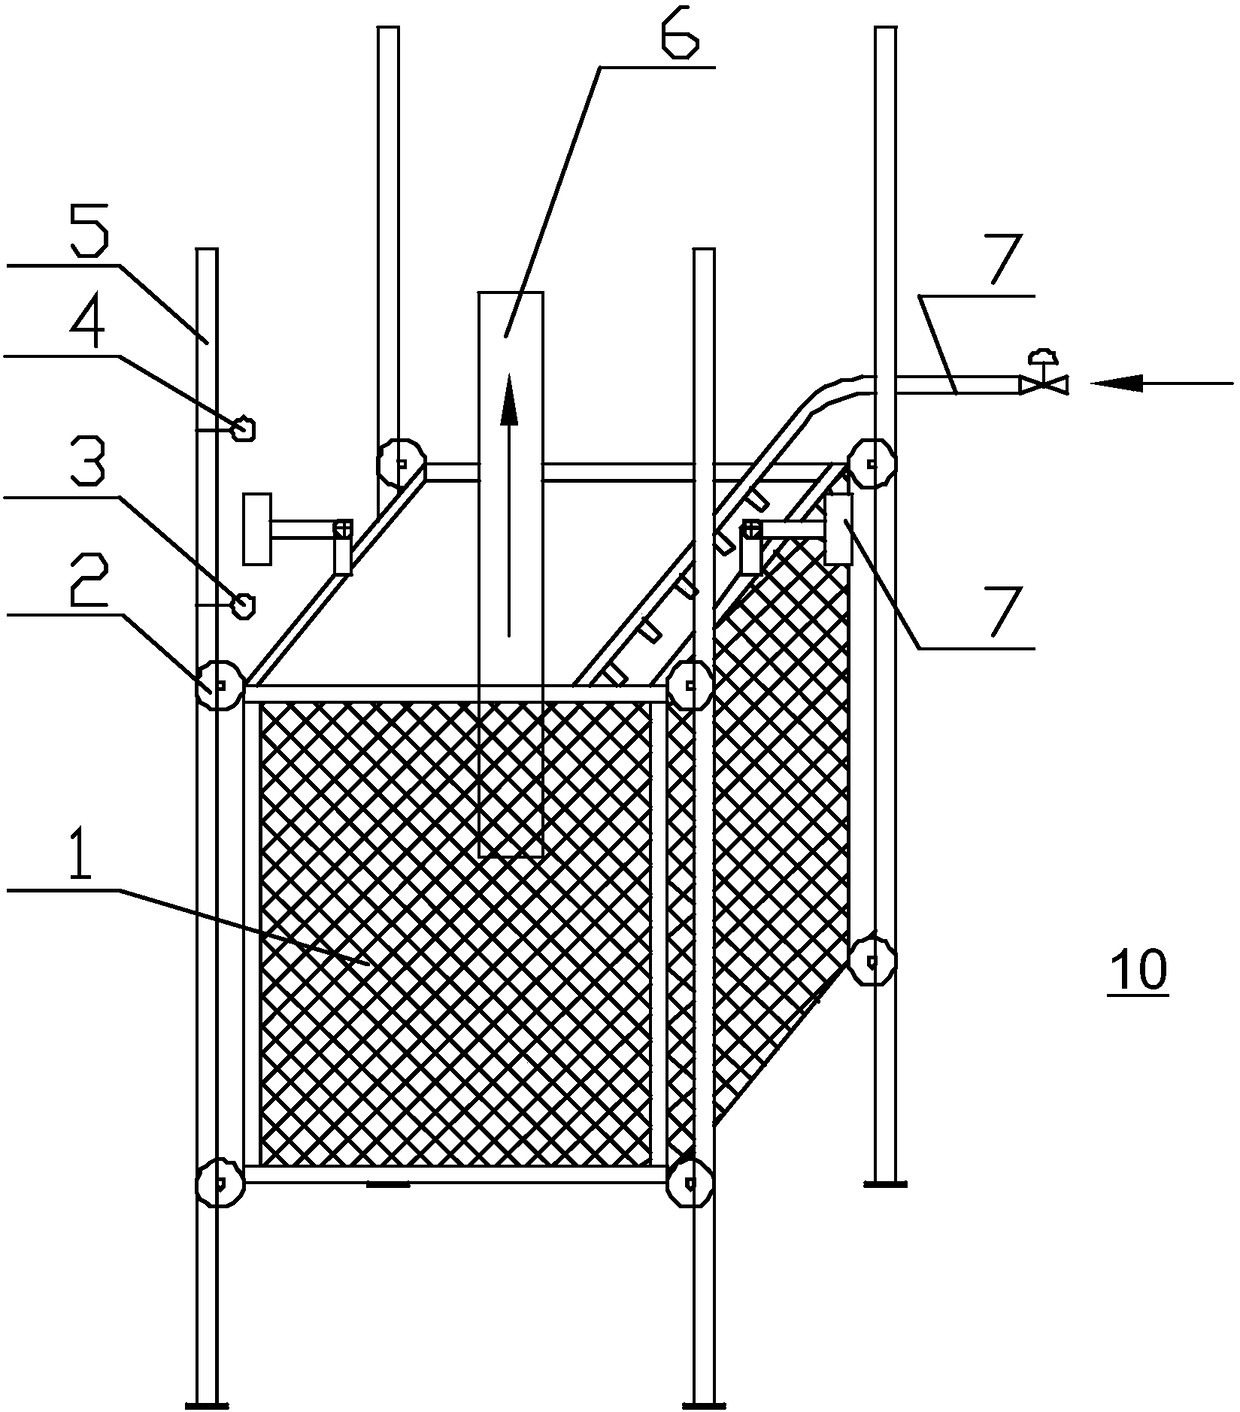 Pretreatment filtering apparatus for waste emulsion